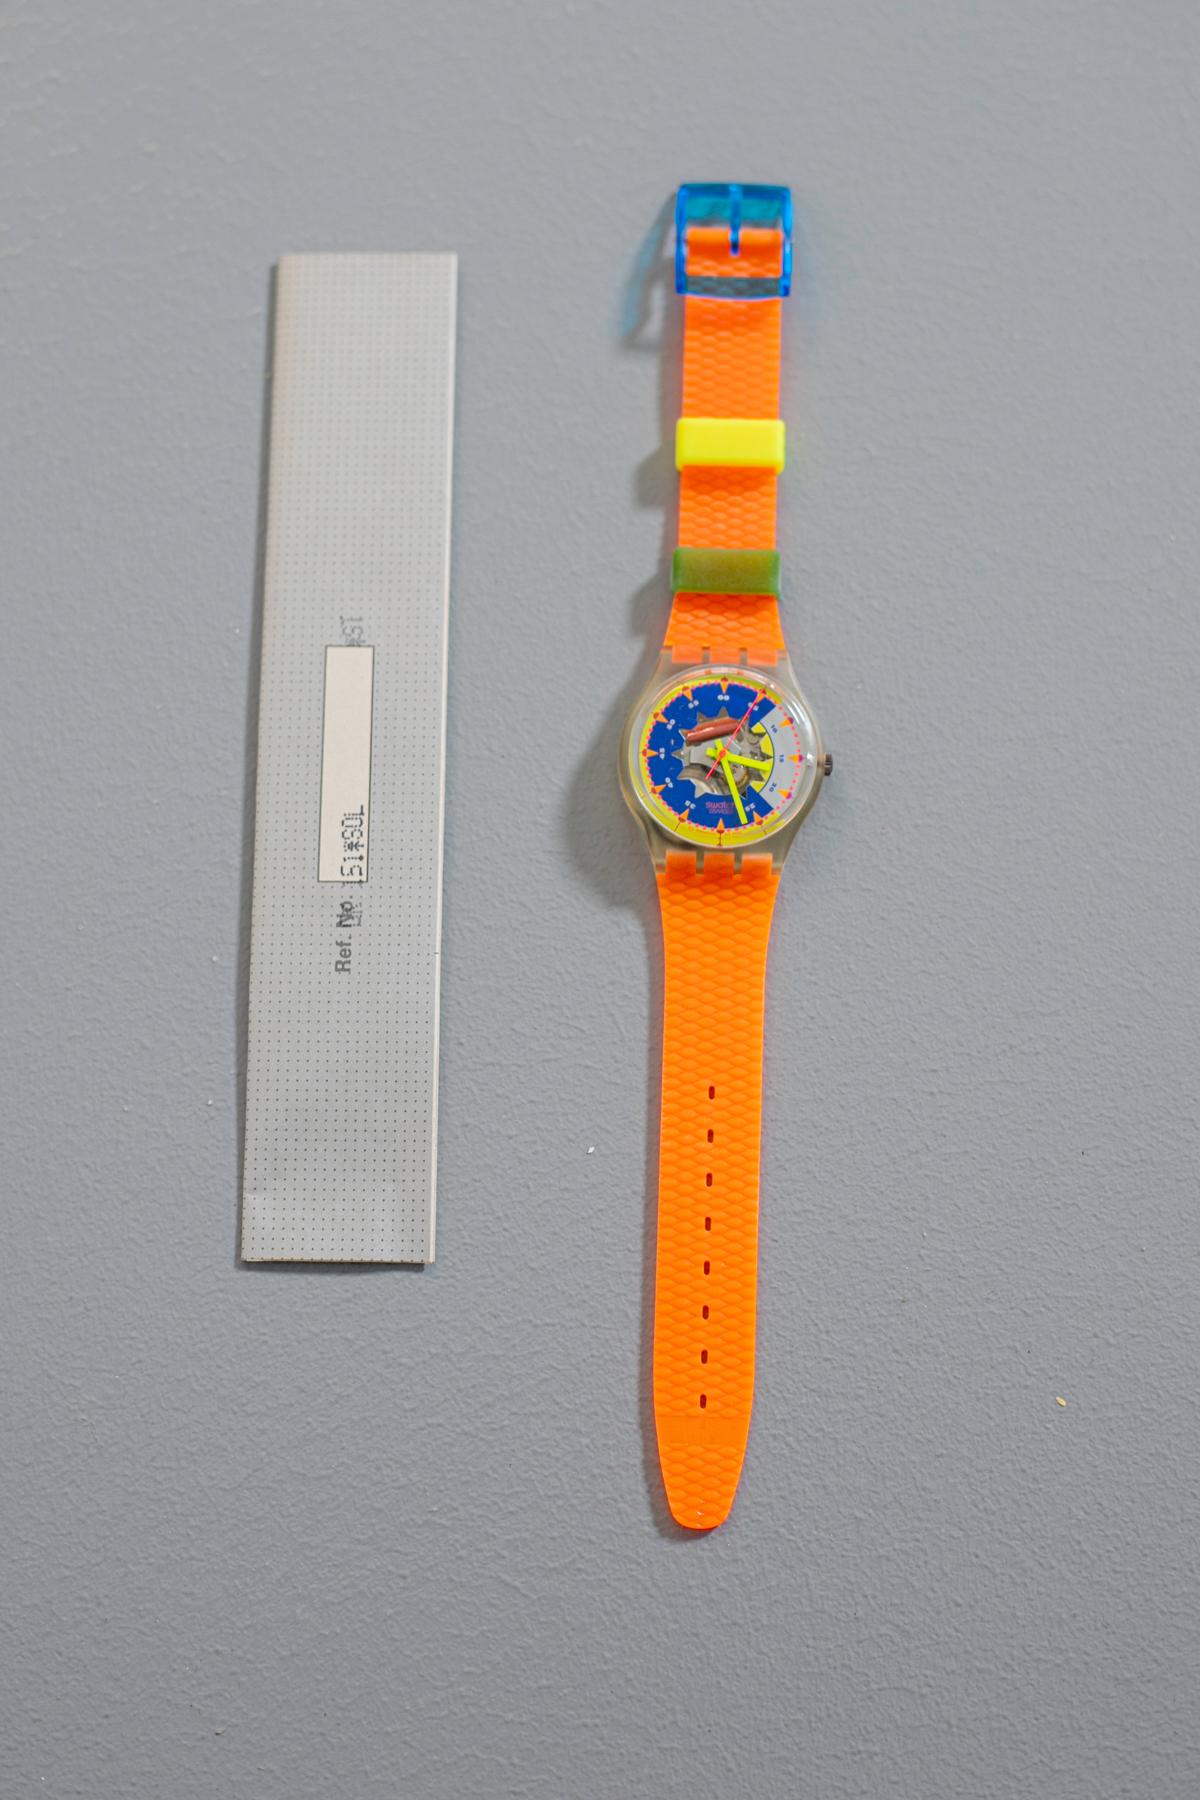 Particular vintage Swatch watch from the 1993 collection. The strap is made of plastic with details that resemble fish scales, the dial has a beautiful graphics with complementary colors, in the center there is a transparent sun in which the gears